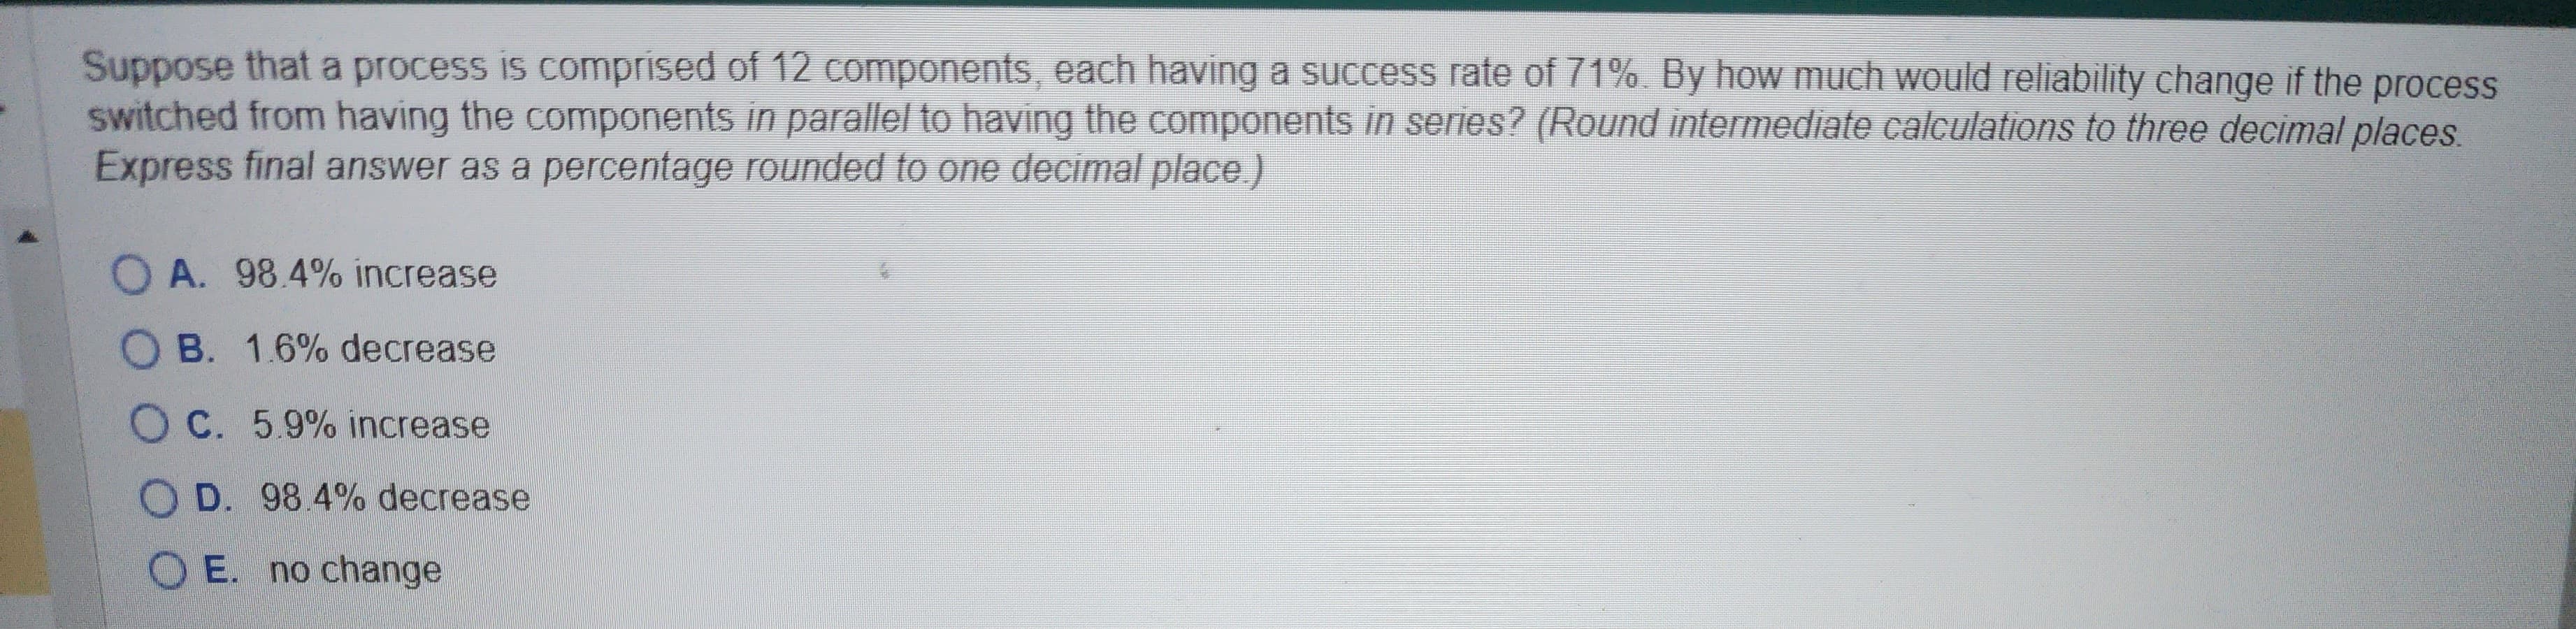 Suppose that a process is comprised of 12 components, each having a success rate of 71%. By how much would reliability change if the process
switched from having the components in parallel to having the components in series? (Round intermediate calculations to three decimal places.
Express final answer as a percentage rounded to one decimal place.)
OA. 98.4% increase
OB. 1.6% decrease
OC. 5.9% increase
D. 98.4% decrease
OE. no change